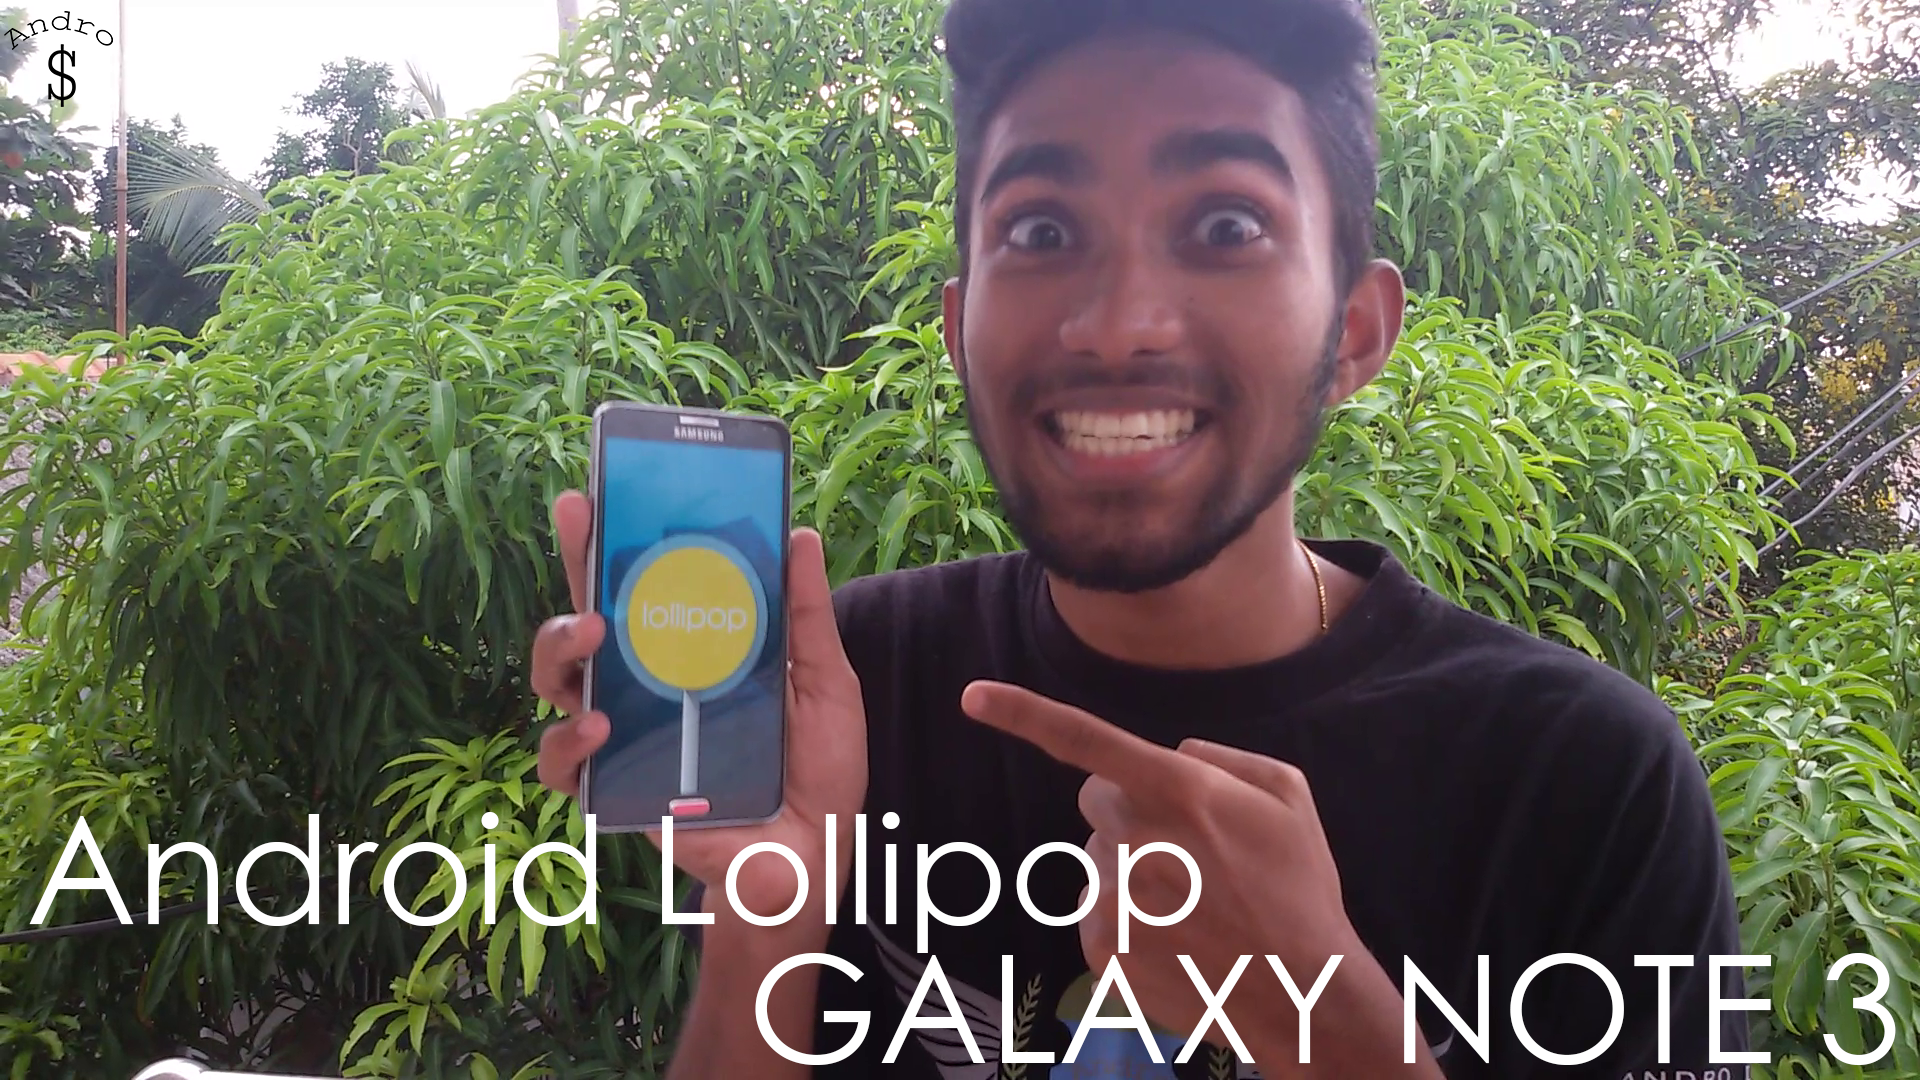 Androd Lollipop Note 3